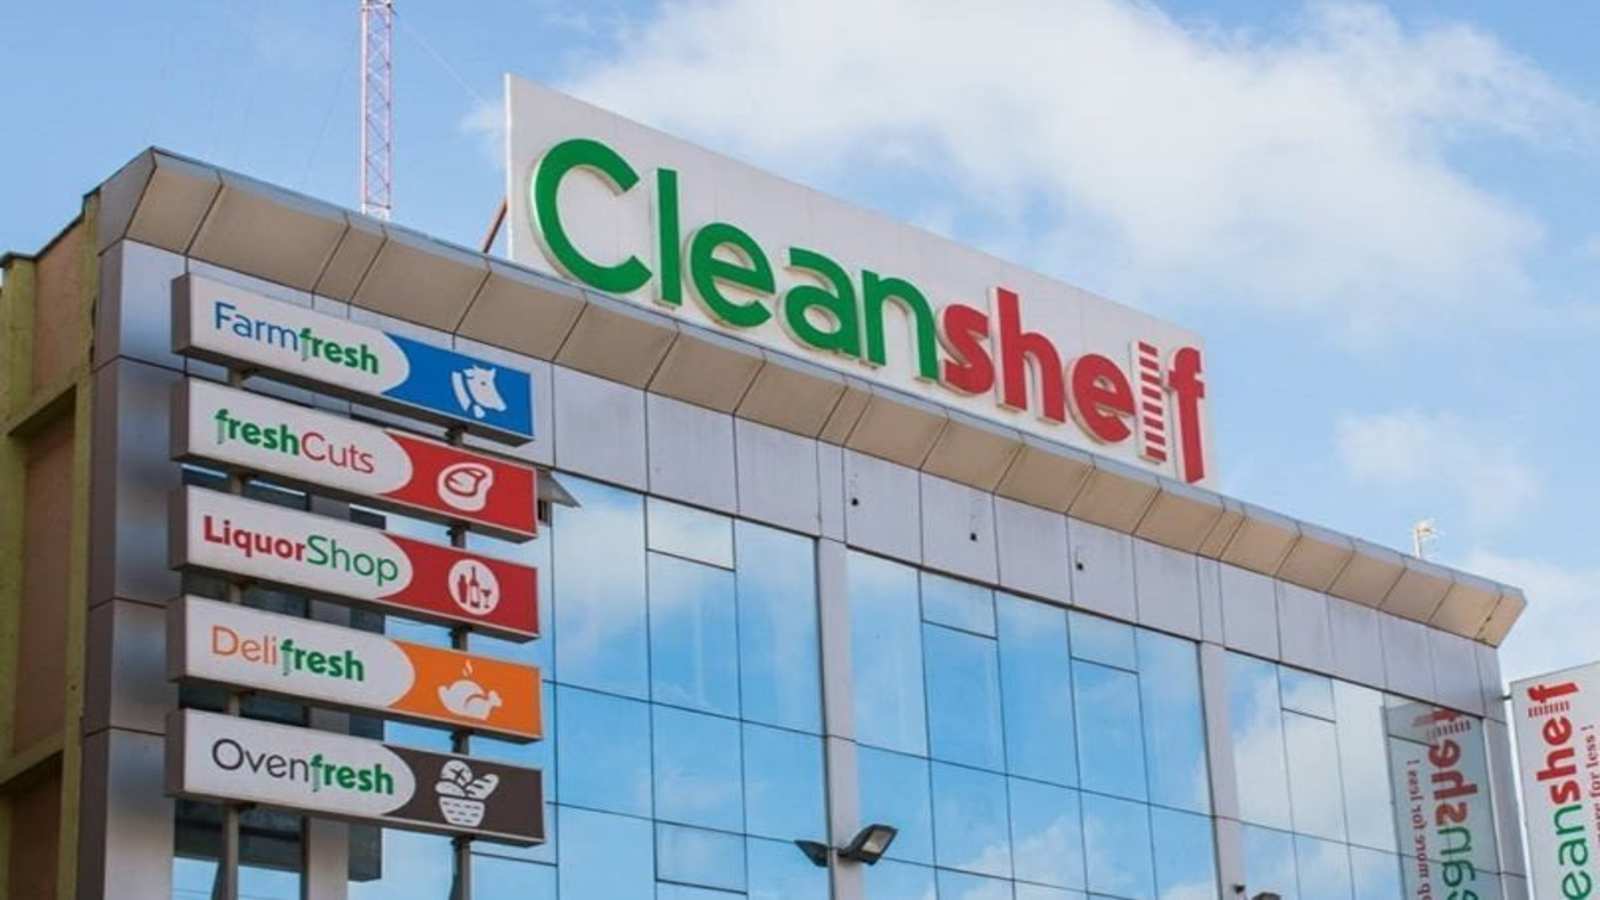 Naivas, Cleanshelf open new branches in Nakuru, take over spaces of struggling Tuskys, Ukwala